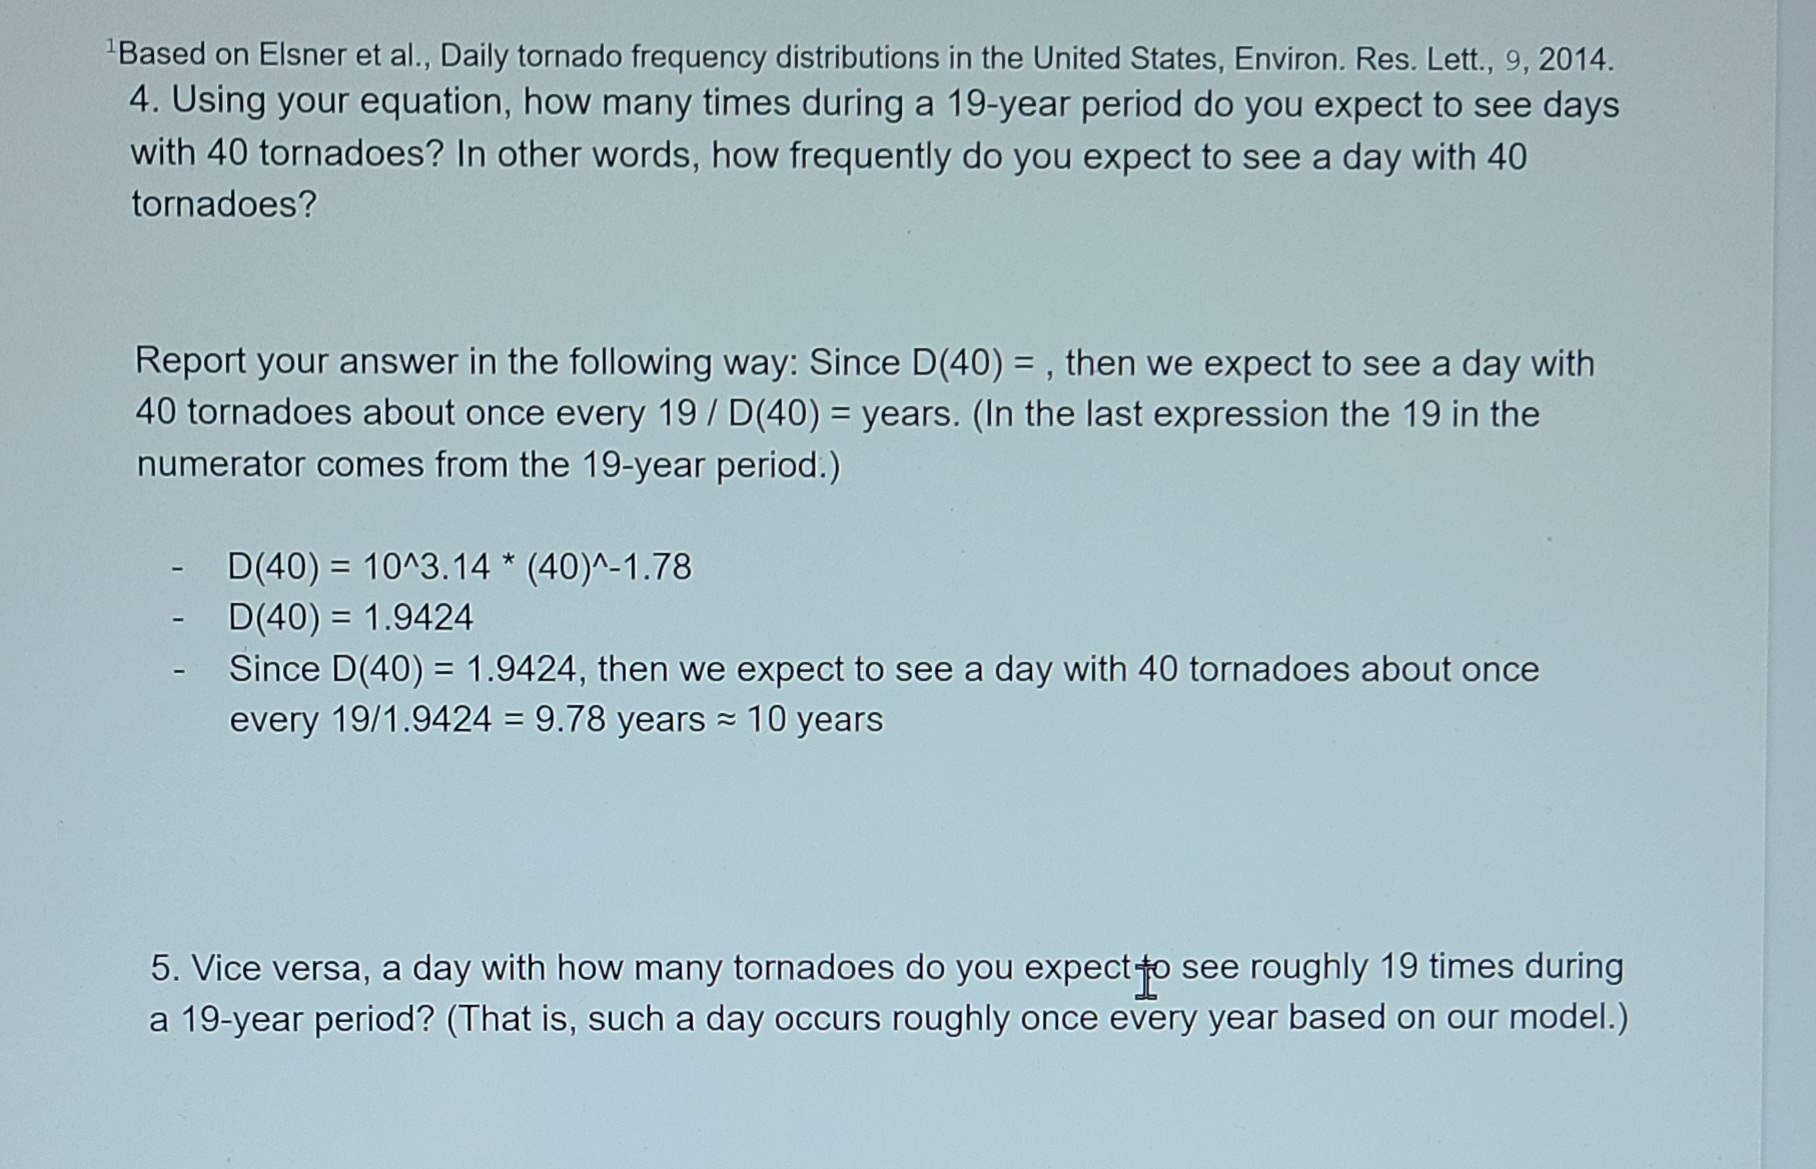 5. Vice versa, a day with how many tornadoes do you expectto see roughly 19 times during
a 19-year period? (That is, such a day occurs roughly once every year based on our model.)
